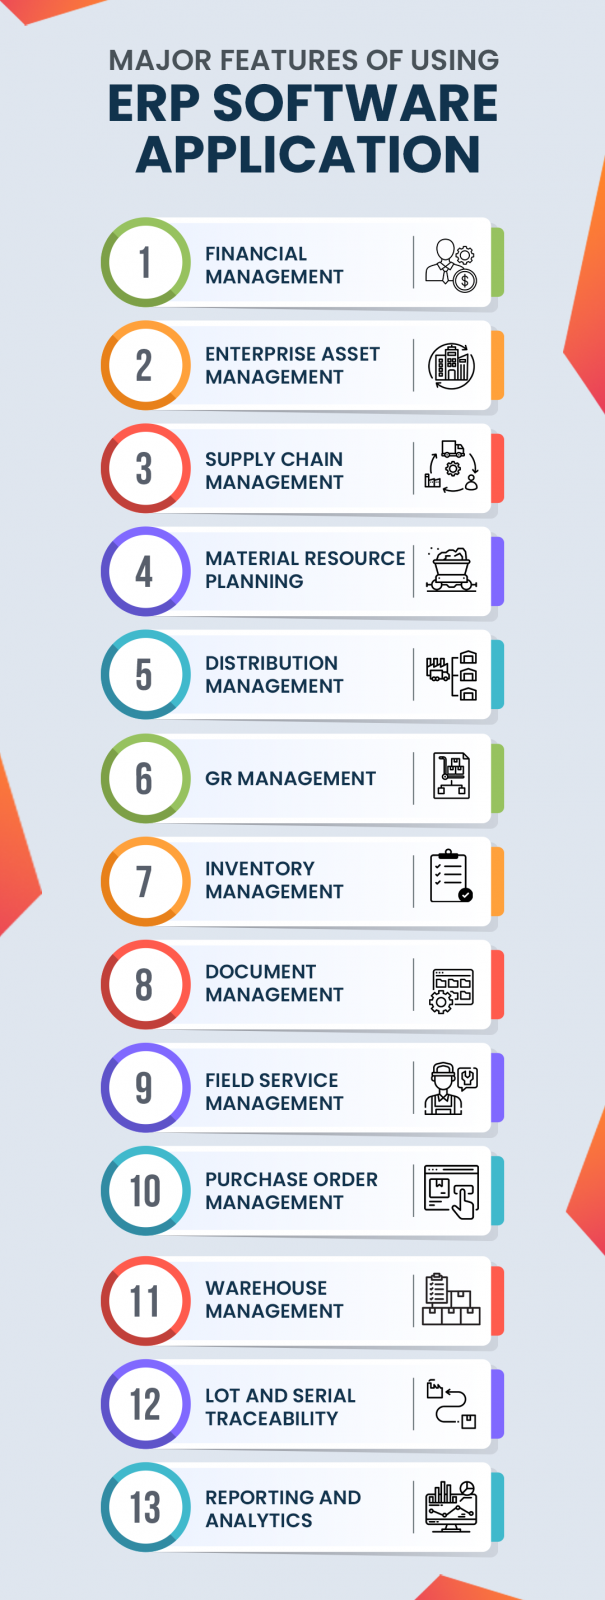 Major Features of Using ERP Software Application